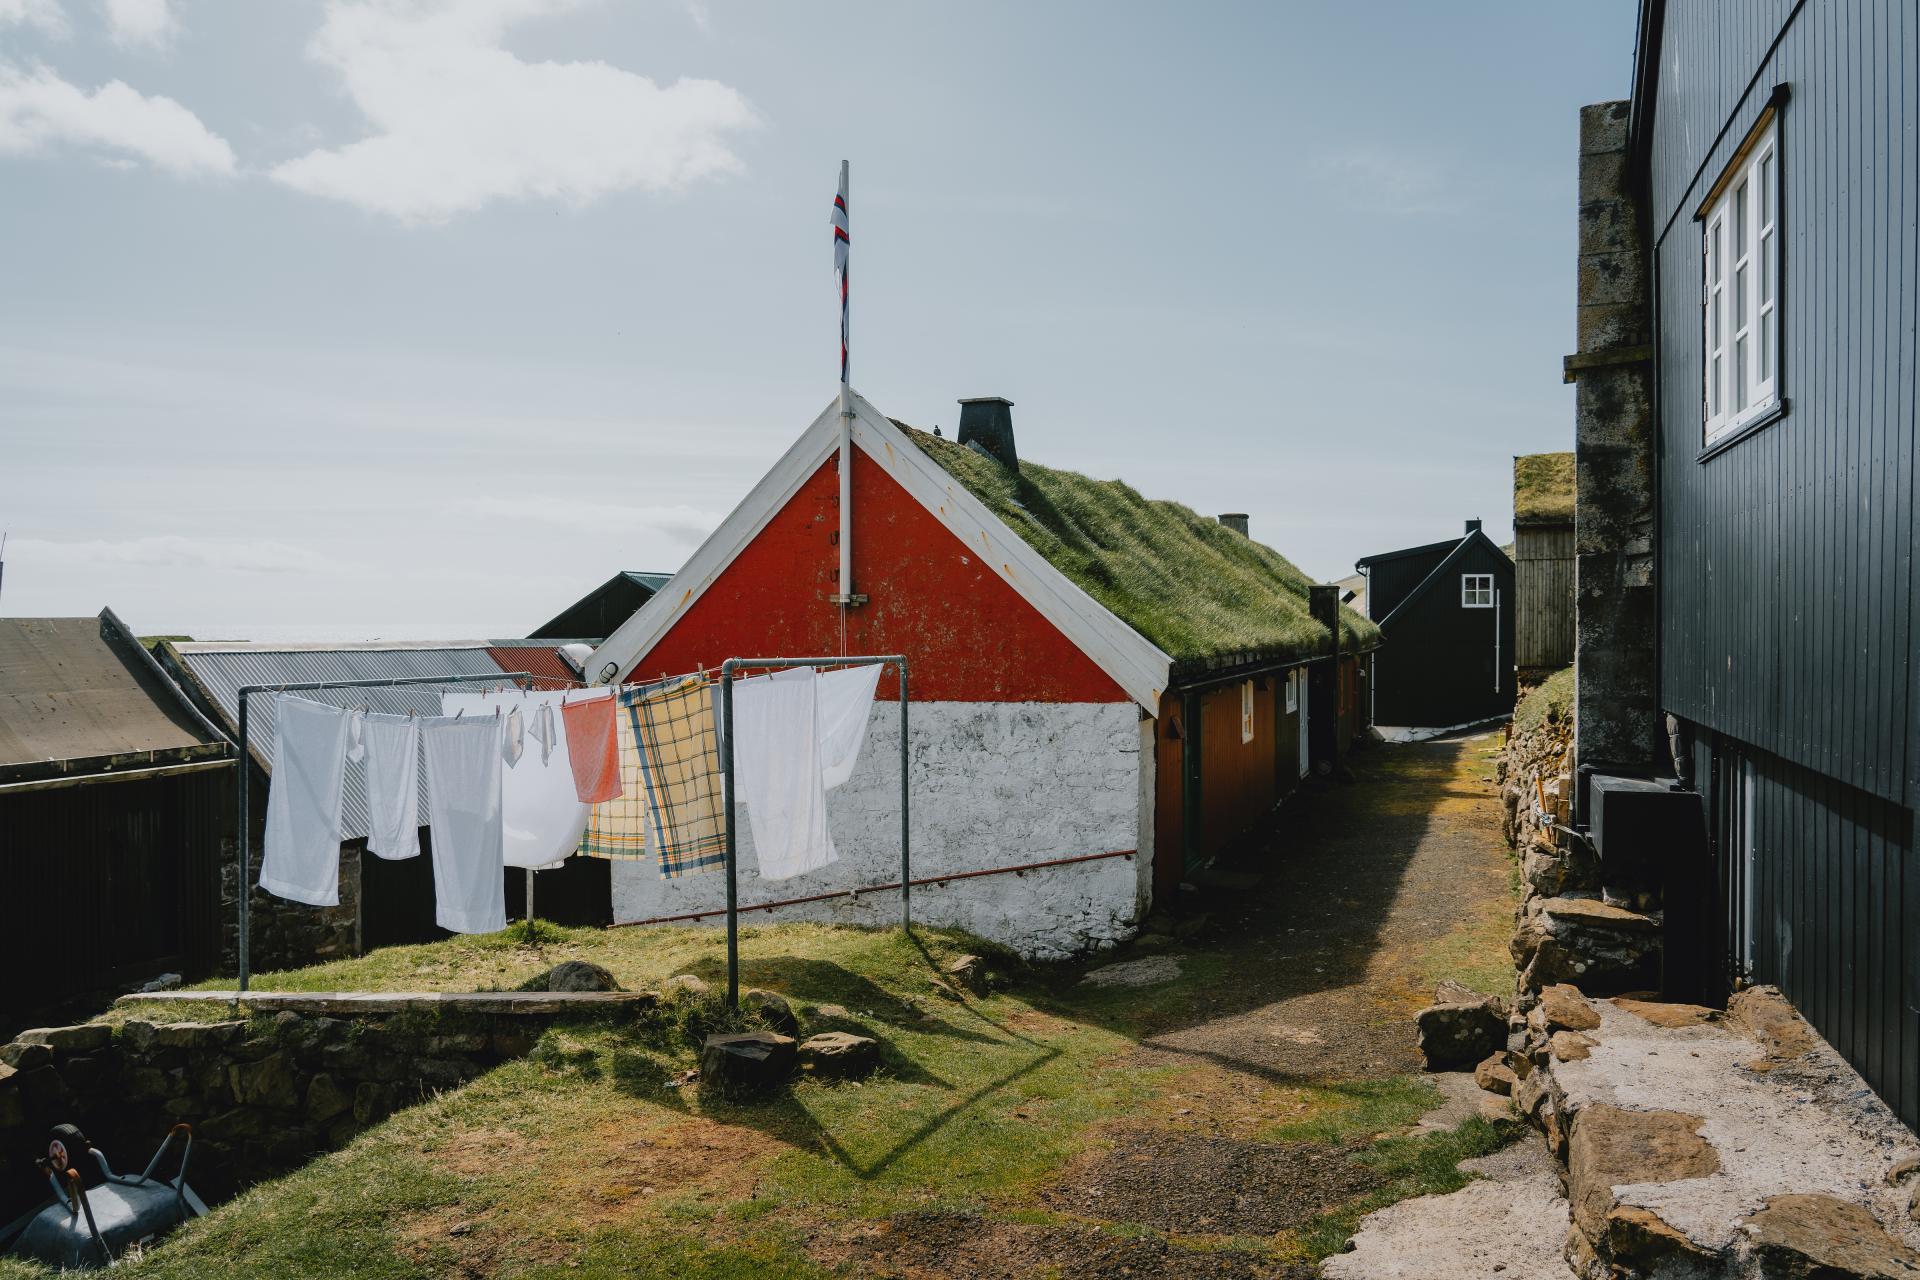 Thumbnail of - The tiny village in the Faroe Islands is called Mykines. Sunny day, laundry hanging outside. Taken by Daniel Casson. 